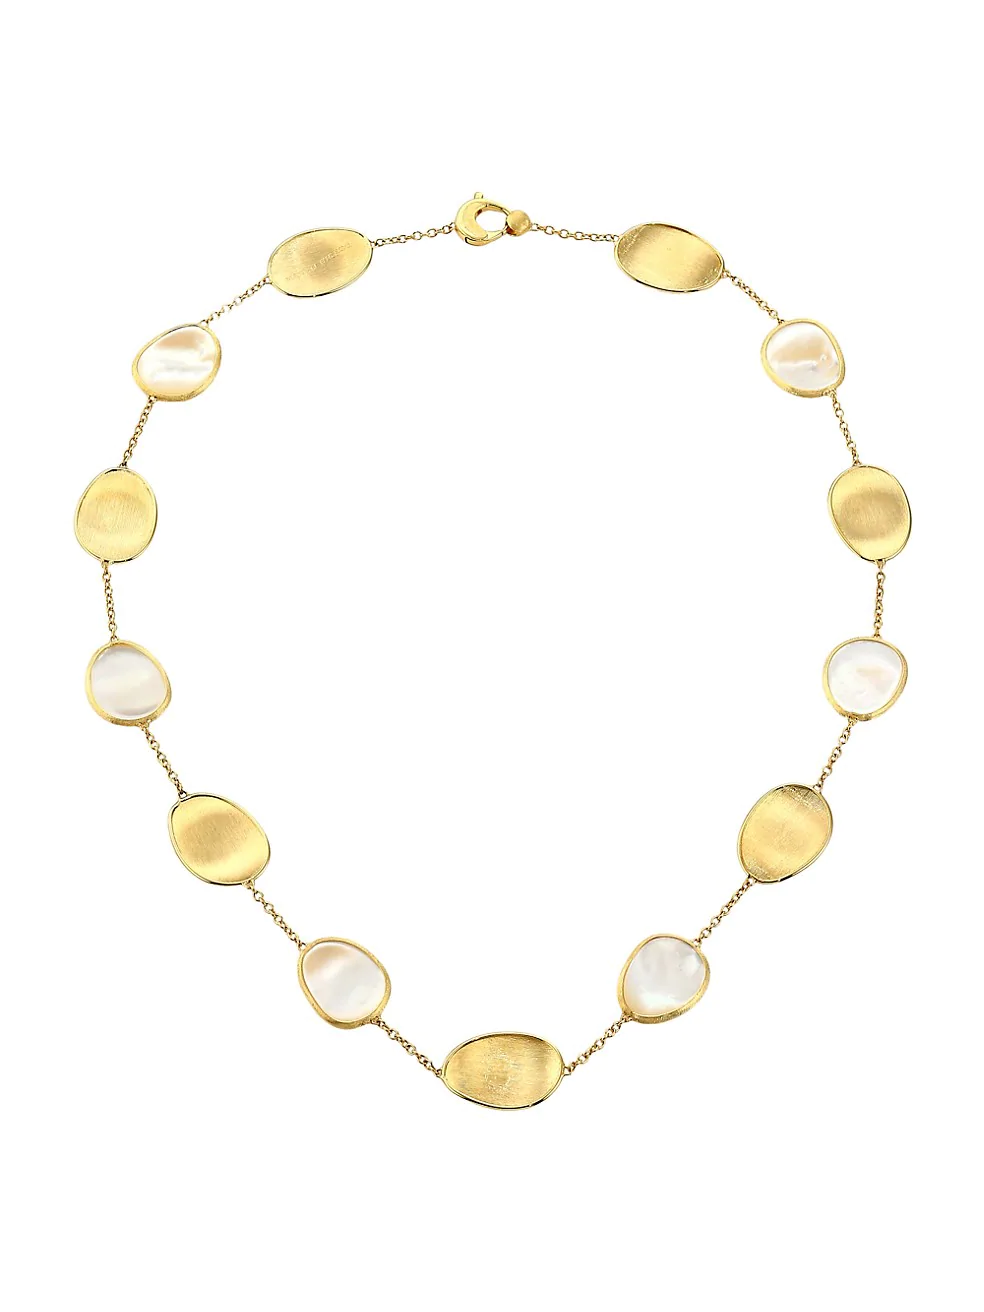 Marco Bicego Gold & Mother-of-Pearl Necklace